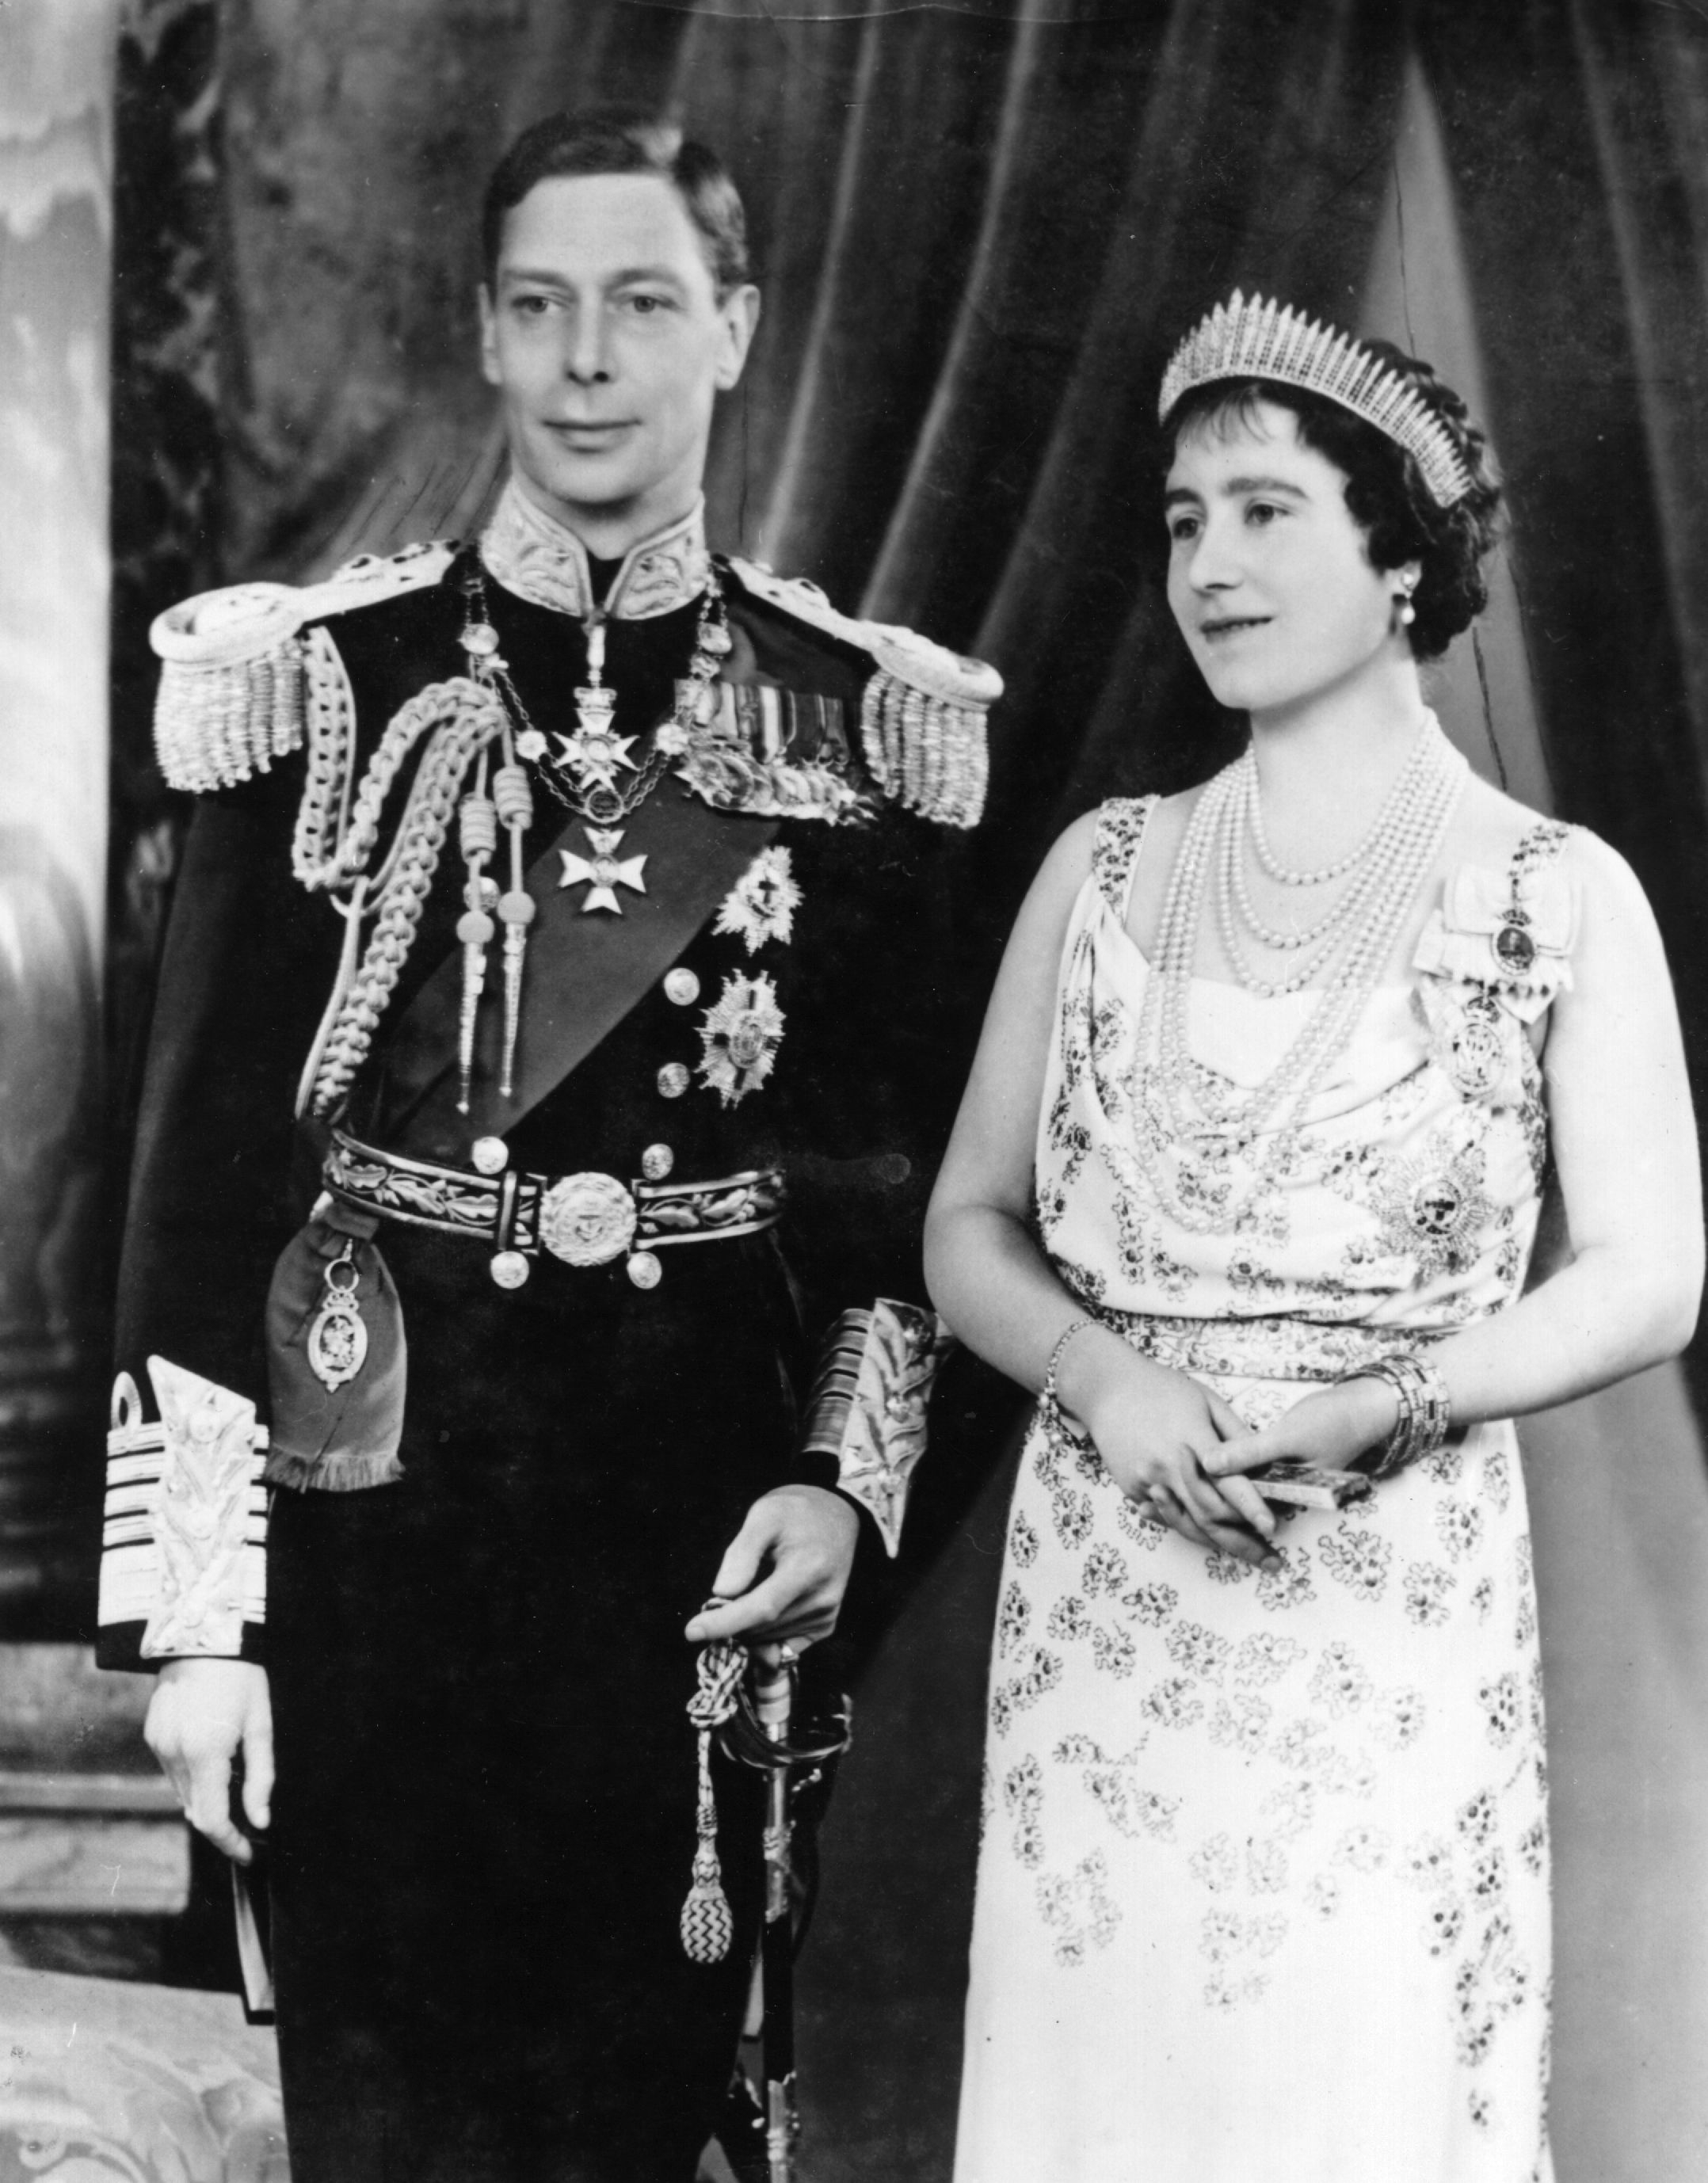 King George VI in military attire and Queen Elizabeth (the Queen Mother) in a formal dress with a tiara